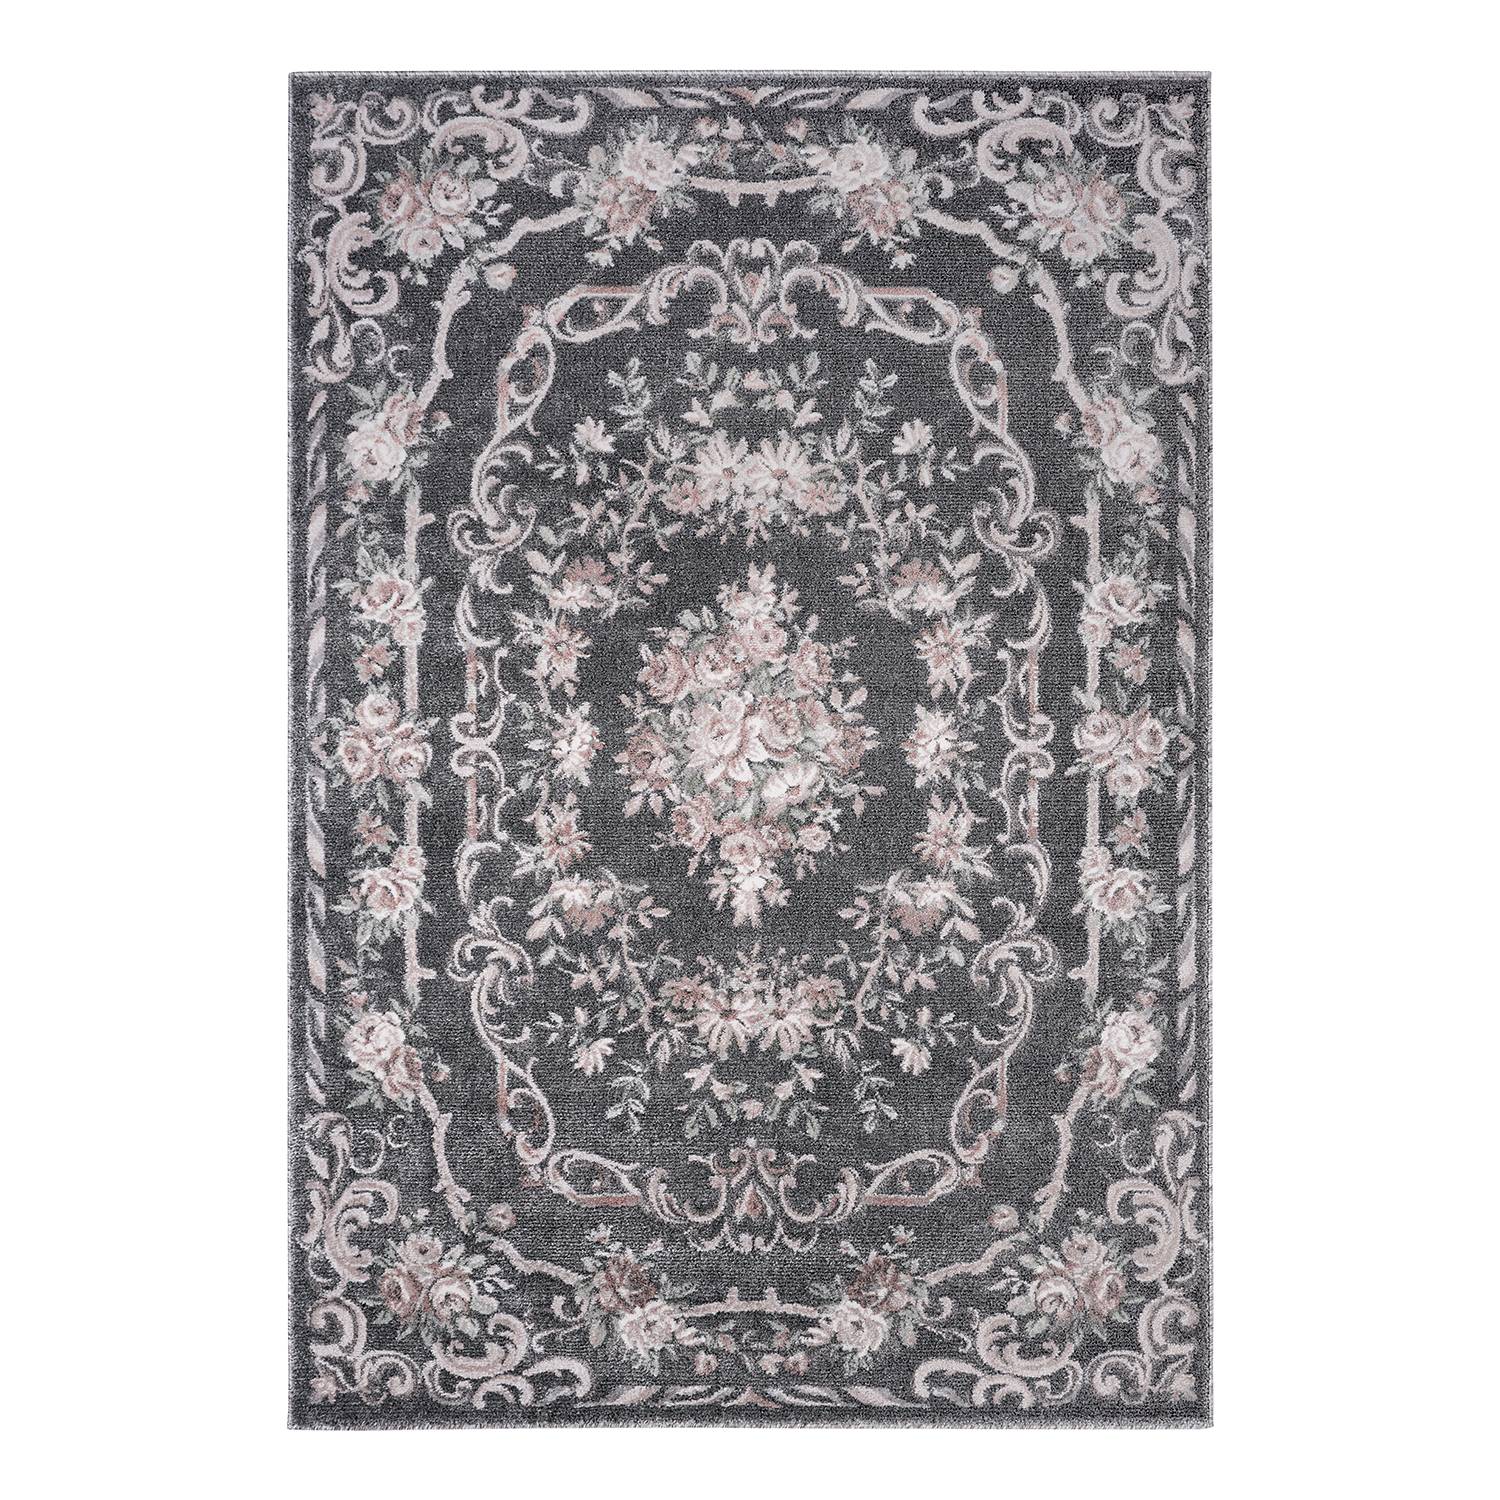 Image of Tapis Aubusson Flore 000000001000244235